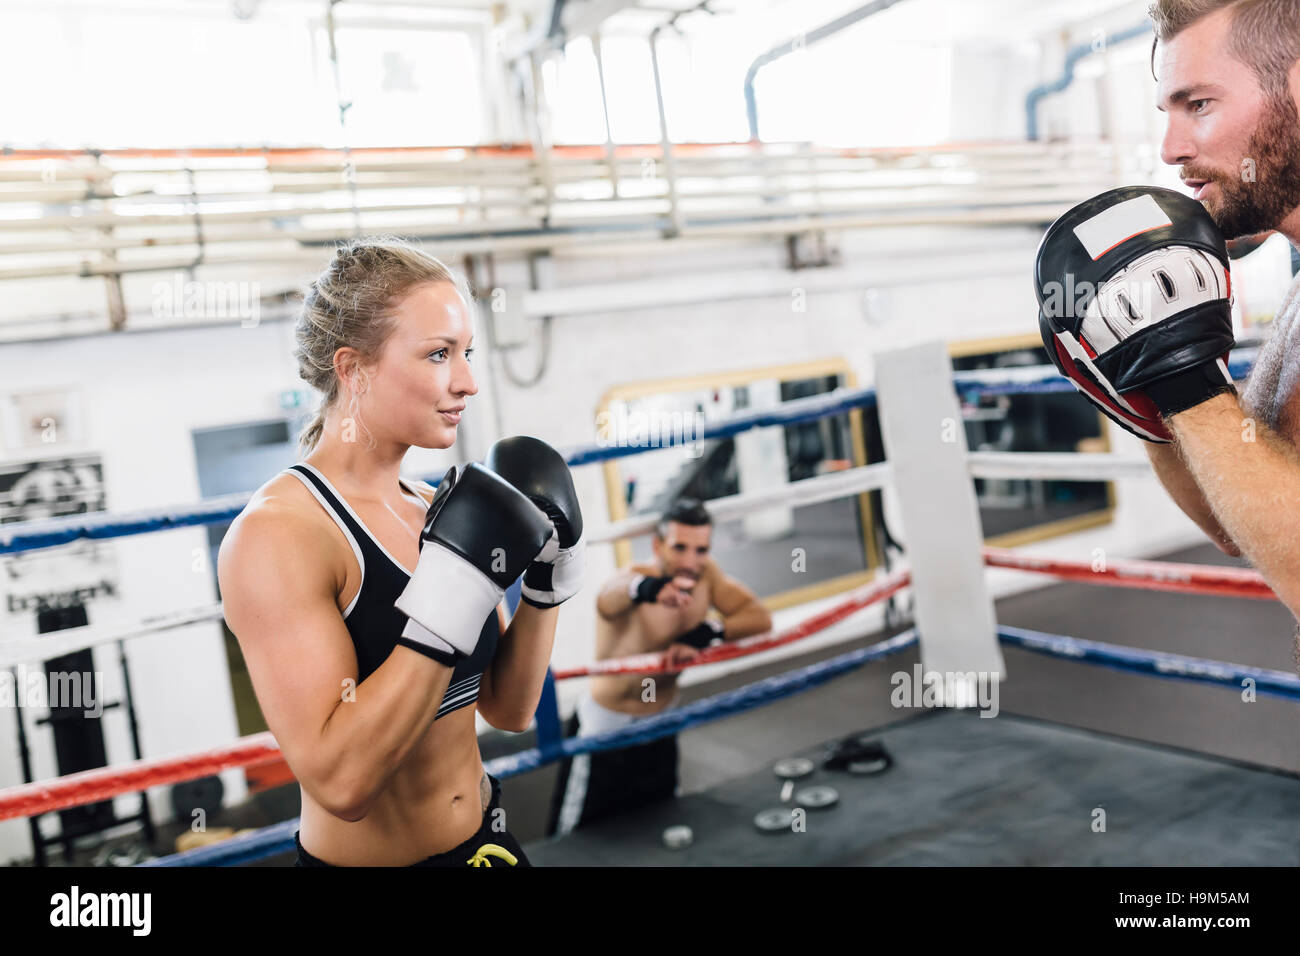 Female boxer sparring with coach Stock Photo